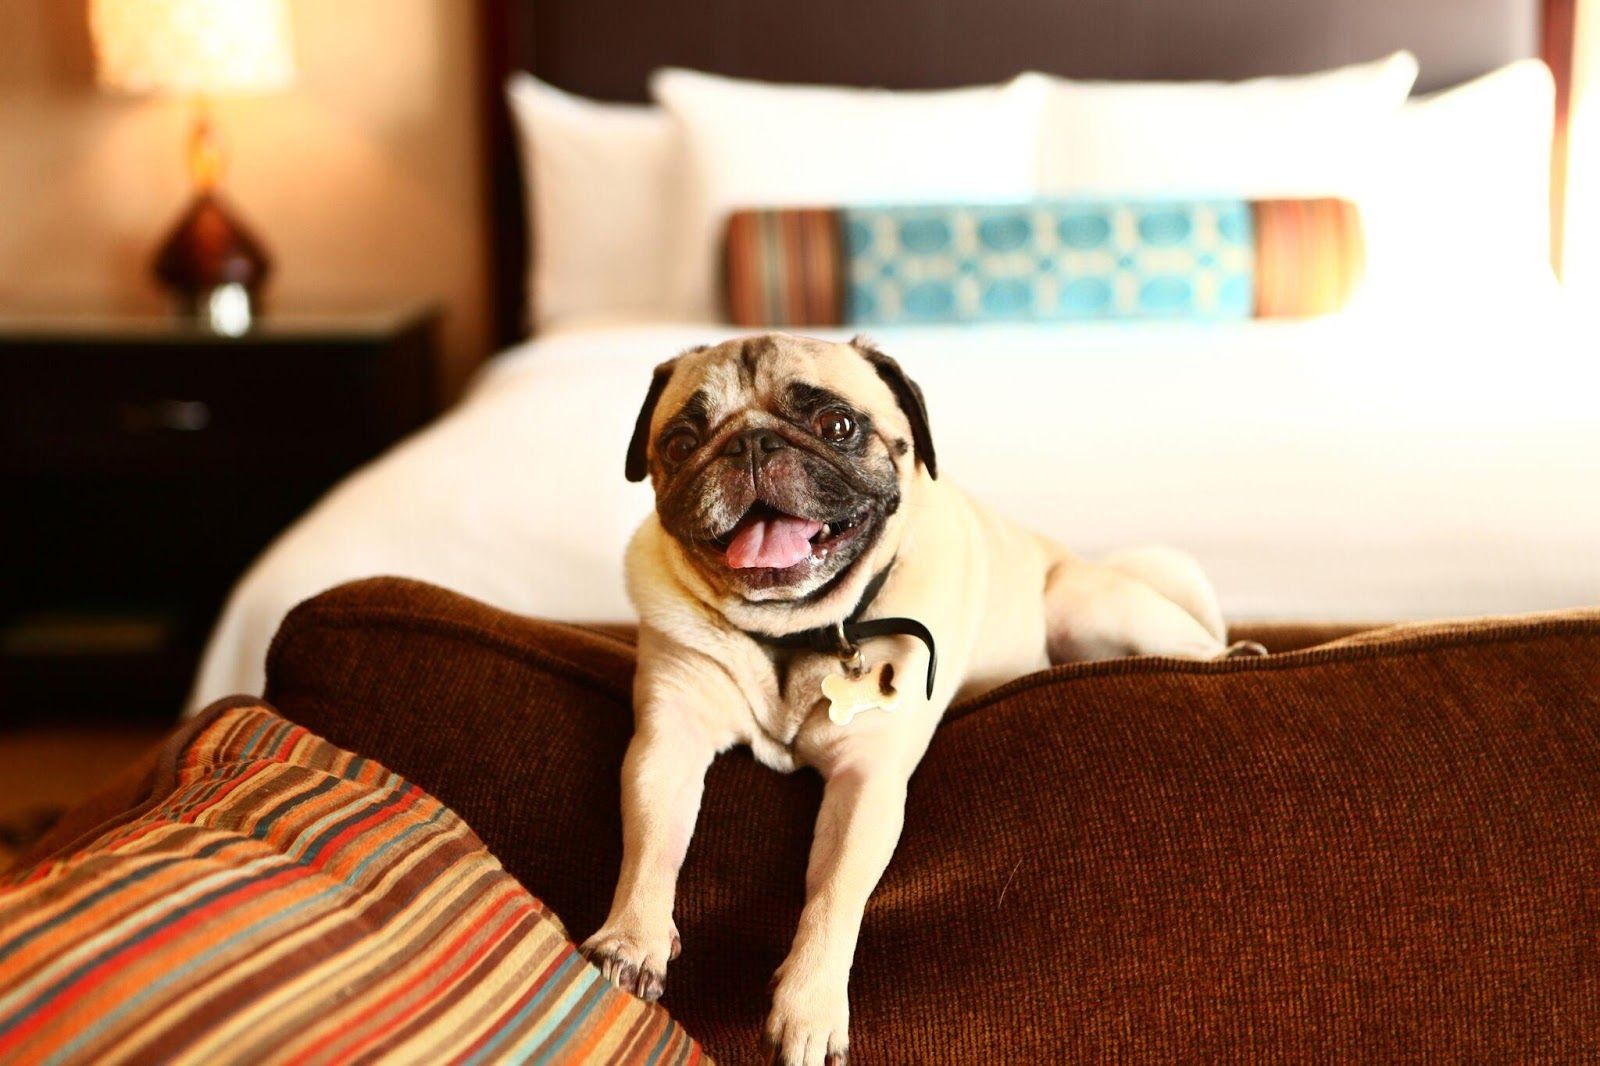 Traveling with a pet in a hotel